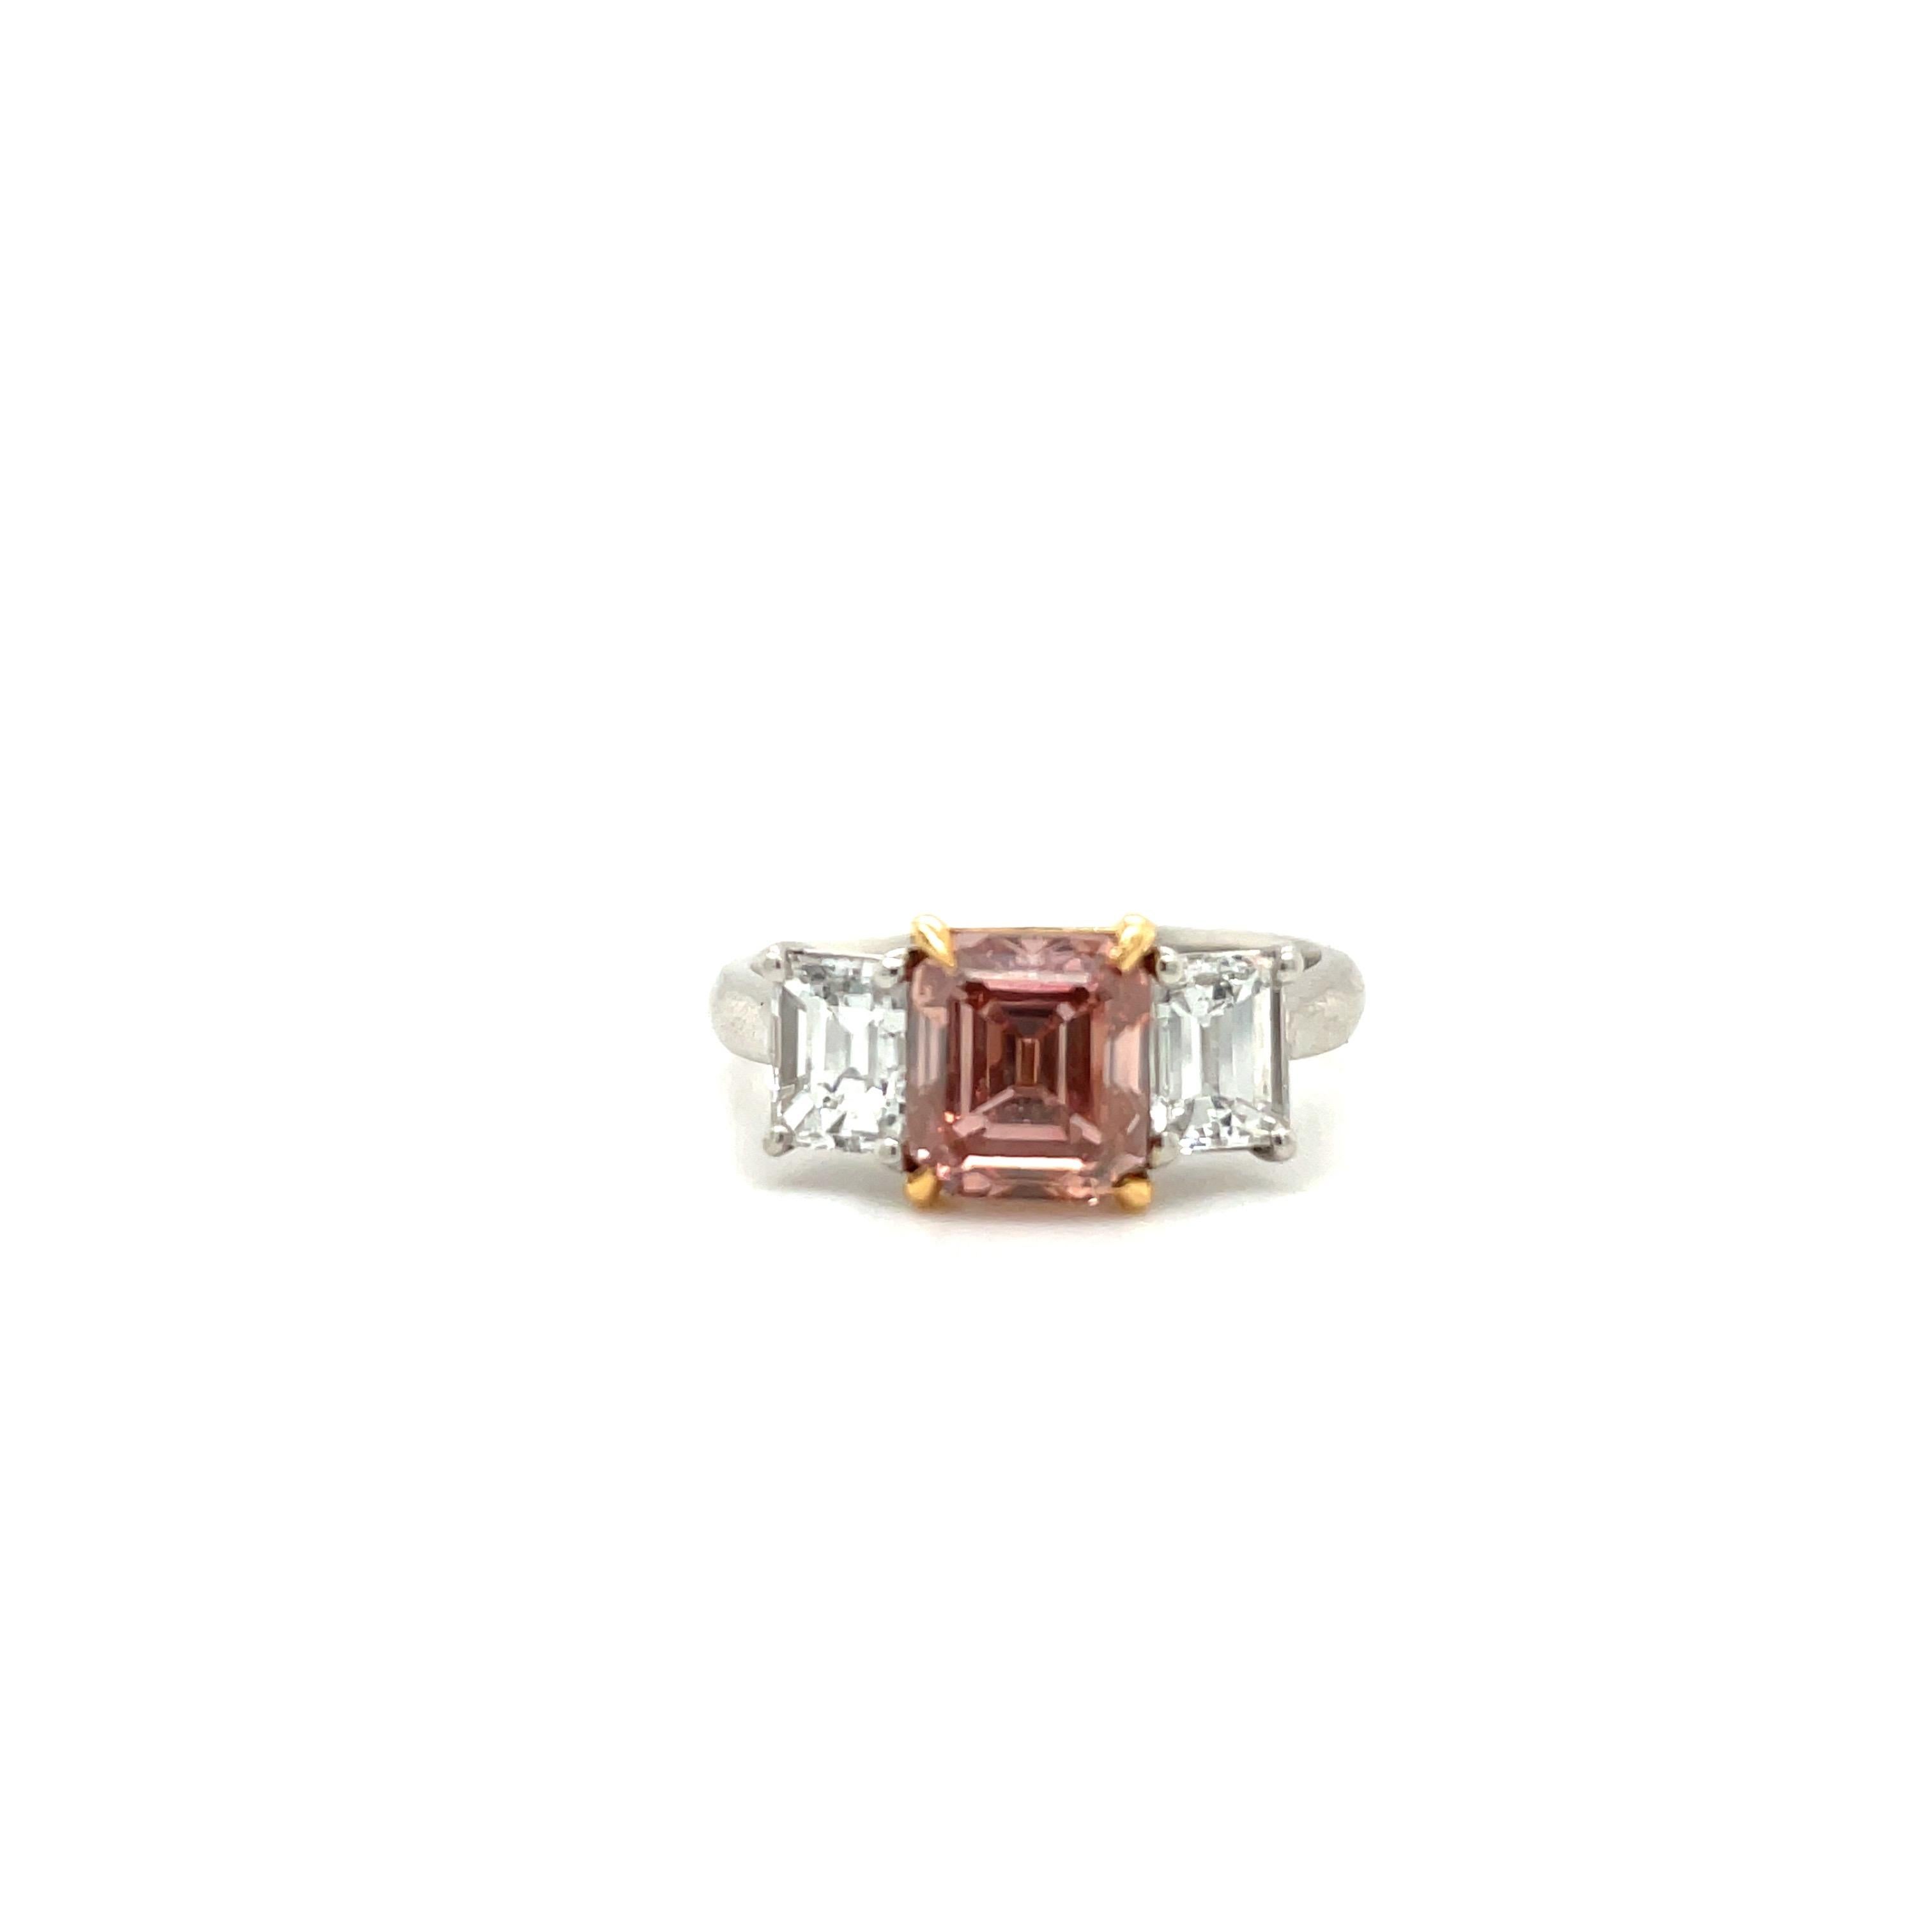 1.75ct GIA Natural Fancy Pink Emerald Cut Diamond Ring For Sale 2